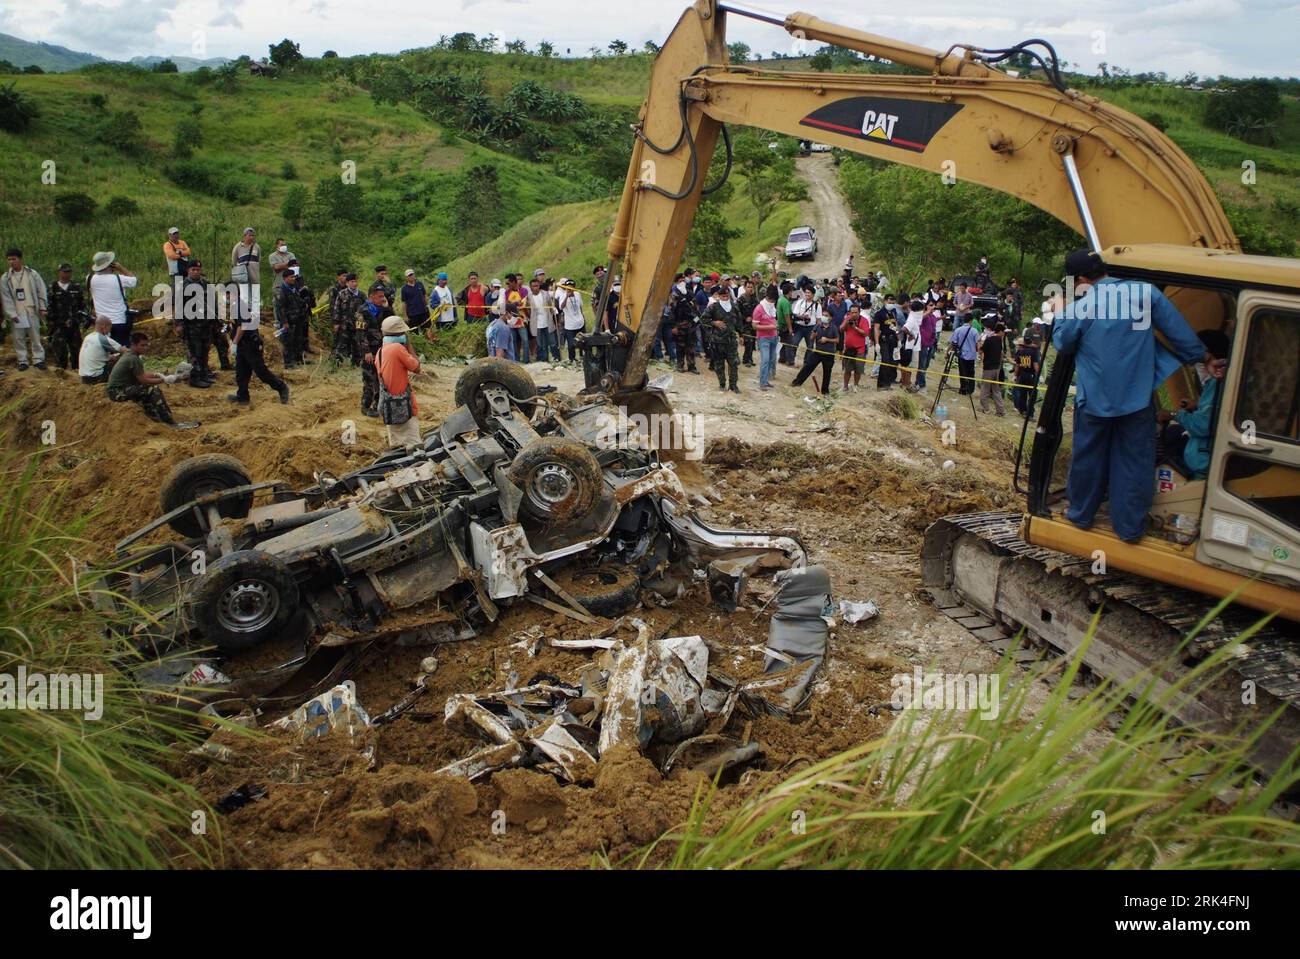 Bildnummer: 53626475  Datum: 25.11.2009  Copyright: imago/Xinhua (091125) -- MANILA, Nov. 25, 2009 (Xinhua) -- A vehicle allegedly used to transport bodies of massacre victims to the mass burial site is unearthed in Ampatuan town, Maguindanao, southern Philippines, on Nov. 25, 2009. At least 57 were killed in the stunning massacre of journalists, civilians and relatives of politicians in the volatile southern Philippines as more bodies were unearthed from a mass grave, military and police officials said. (Xinhua/Jes Aznar) (lyi) PHILIPPINES-MAGUINDANAO-MASSACRE-VEHICLE PUBLICATIONxNOTxINxCHN P Stock Photo